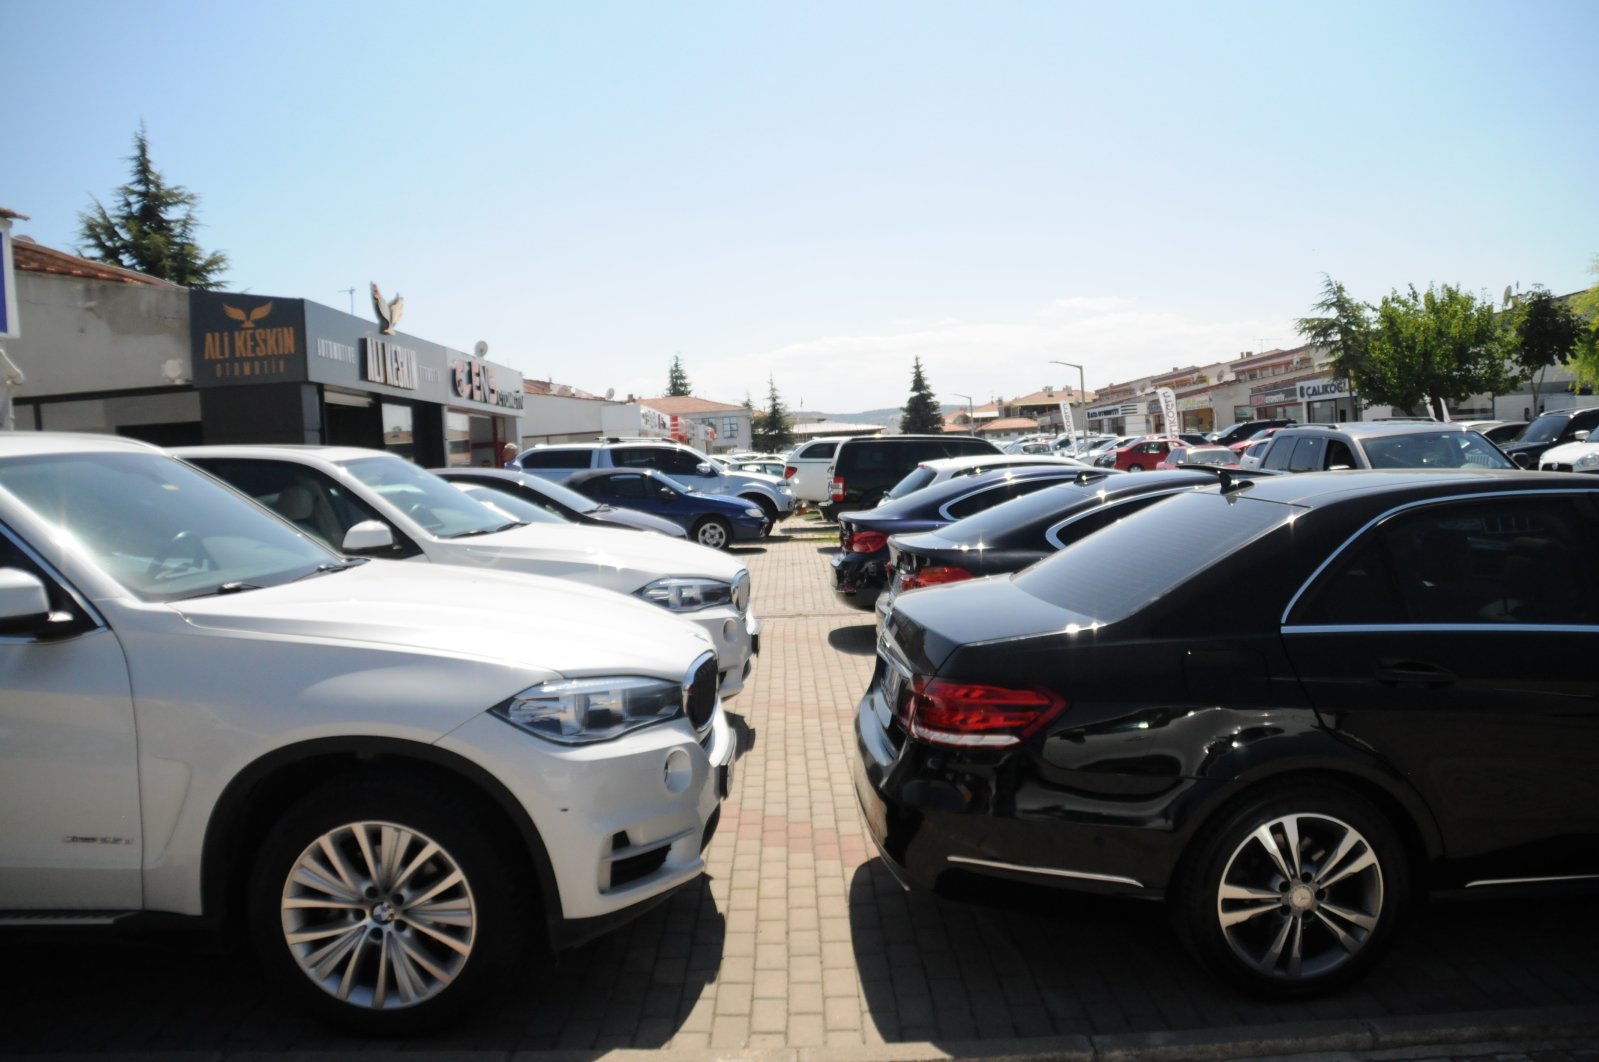 Rental passenger cars are parked at a showroom in Central Anatolian Eskişehir province in Turkey August 24 2020. (IHA Photo)